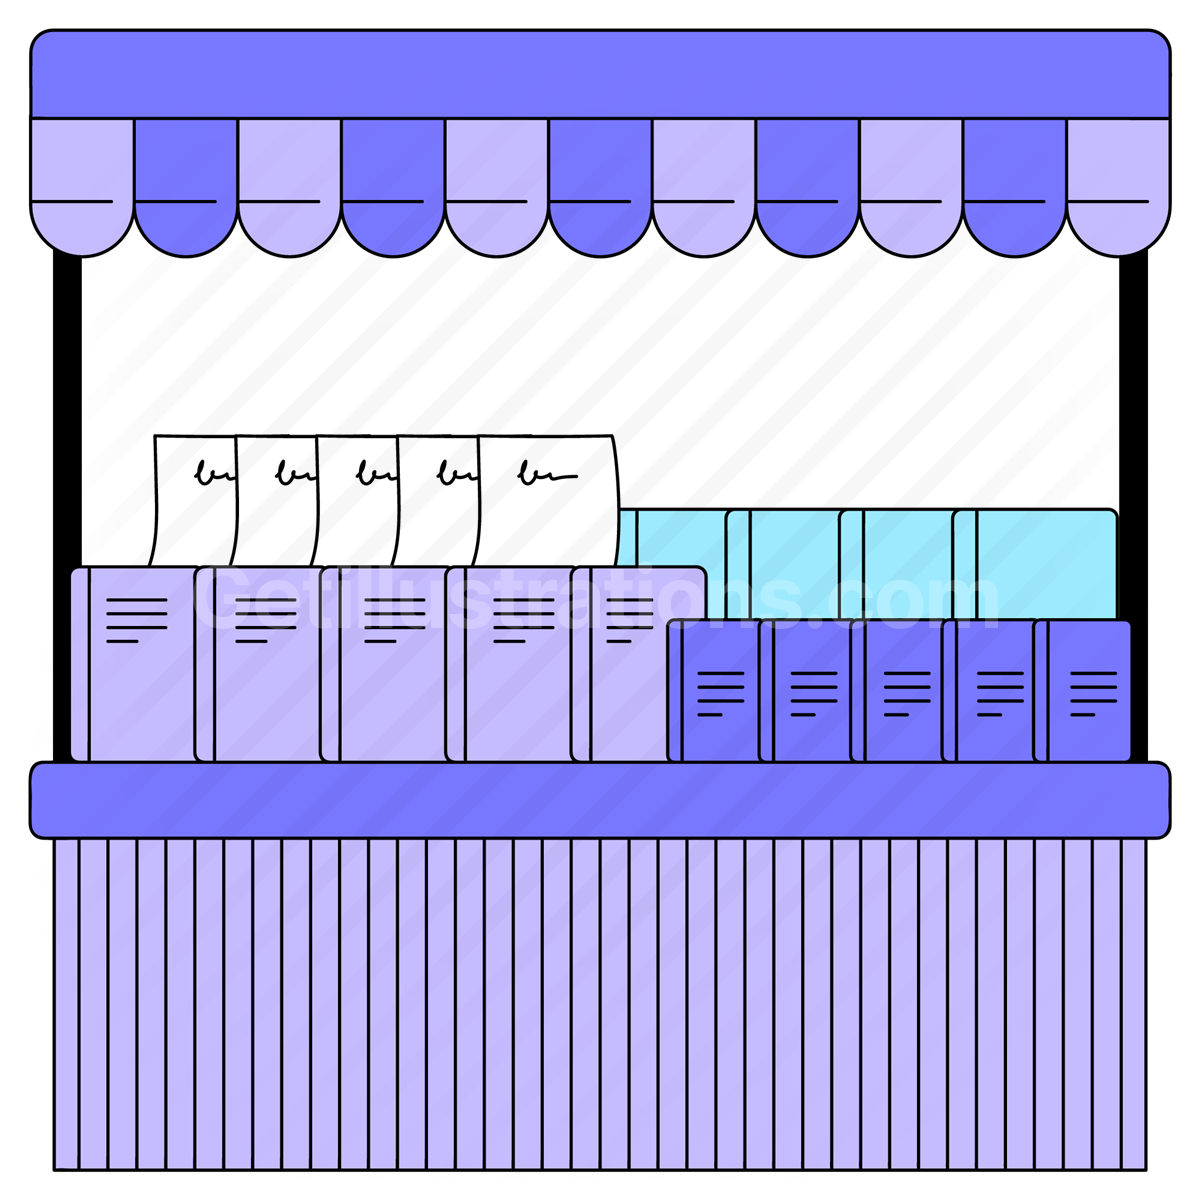 Shopping and Retail  illustration